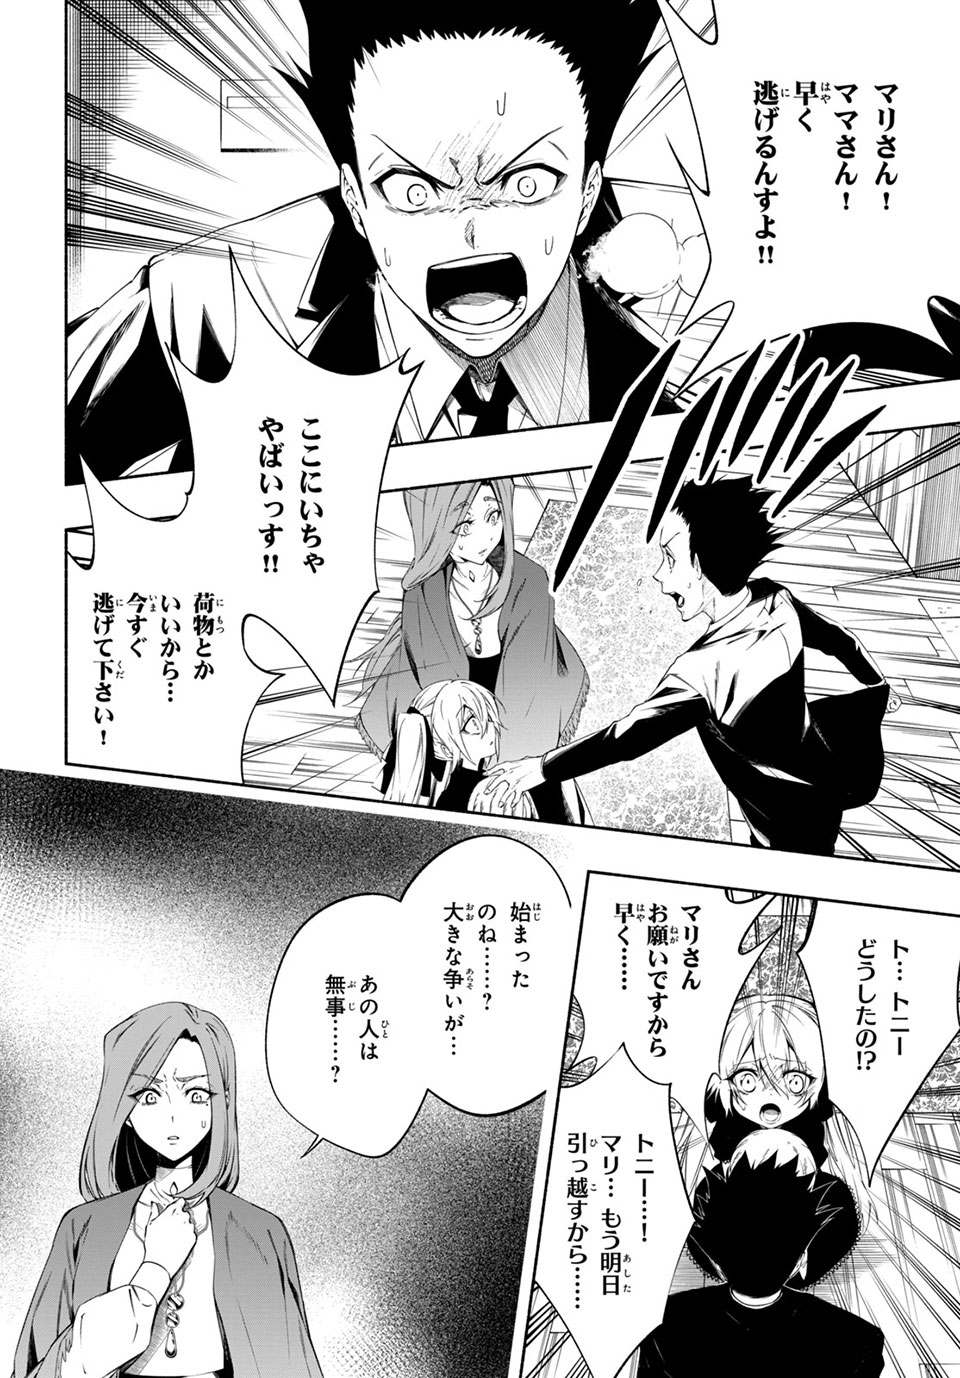 Shaman King: and a garden 第13.3話 - Page 6